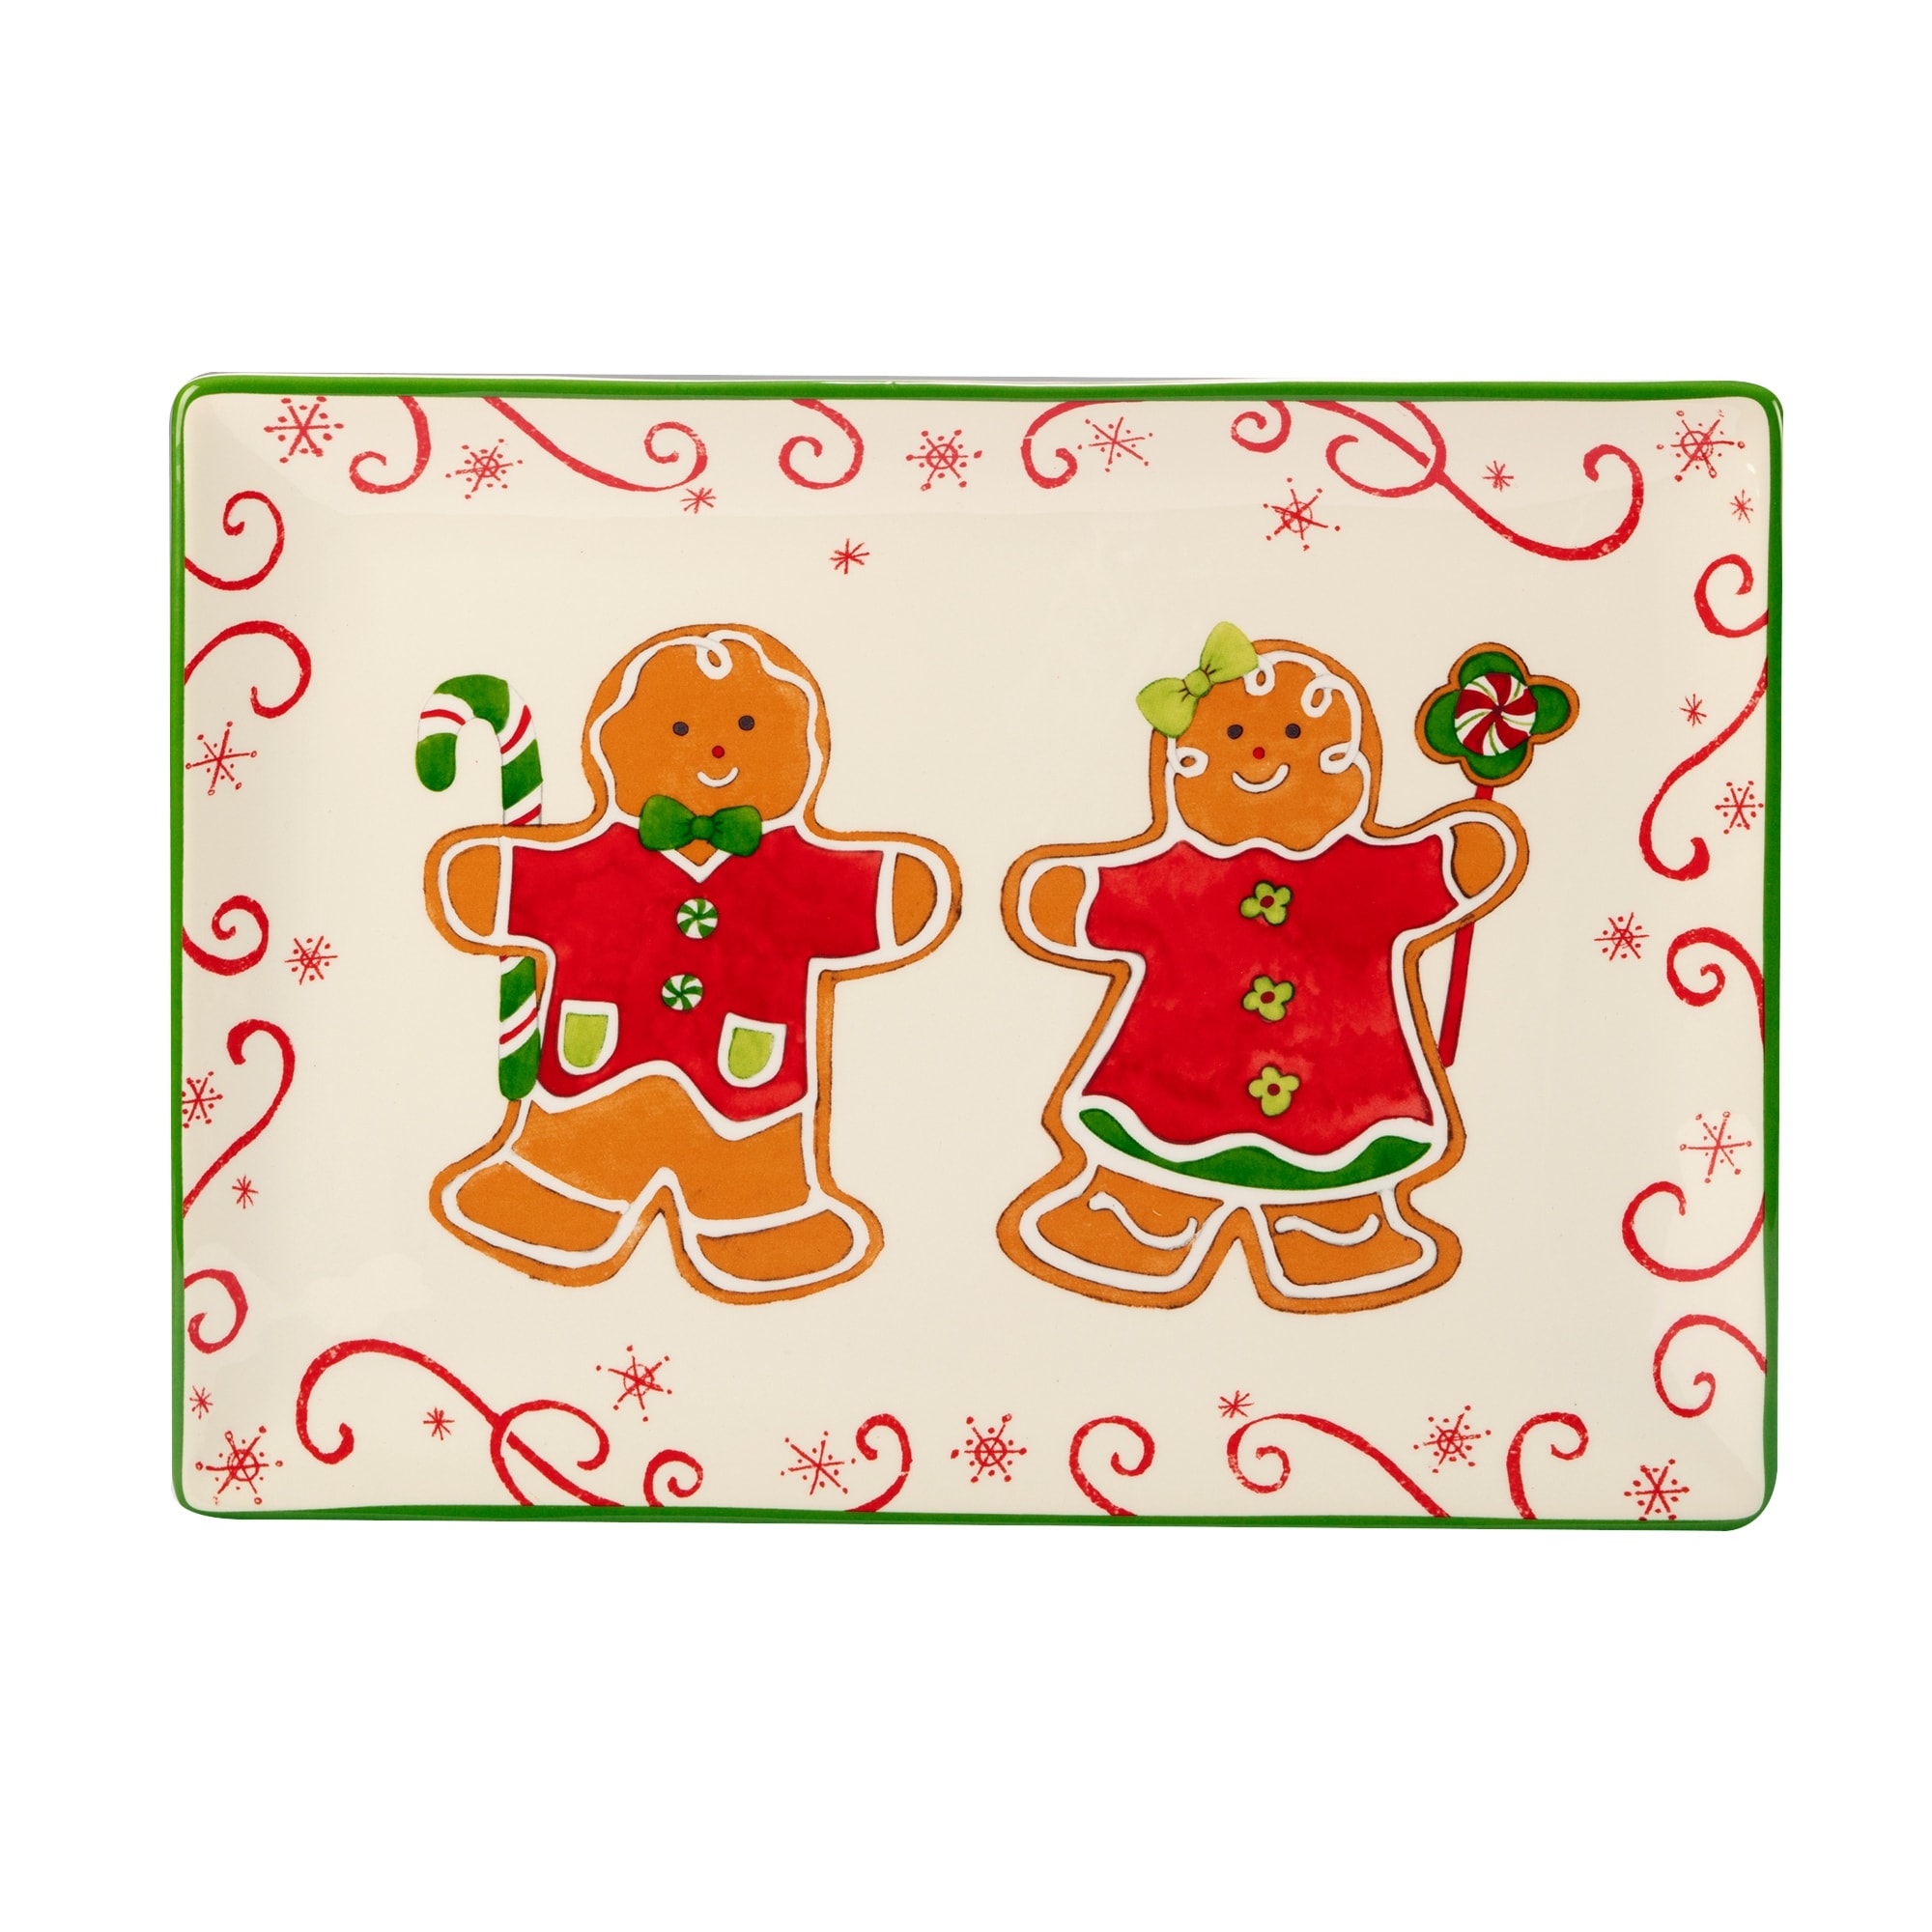 https://ak1.ostkcdn.com/images/products/is/images/direct/74df2103f4e3fcc5888a91361507a2fc8fc9eb50/Certified-International-Holiday-Magic-Gingerbread-14%22-x-10%22-Rectangular-Serving-Platter.jpg